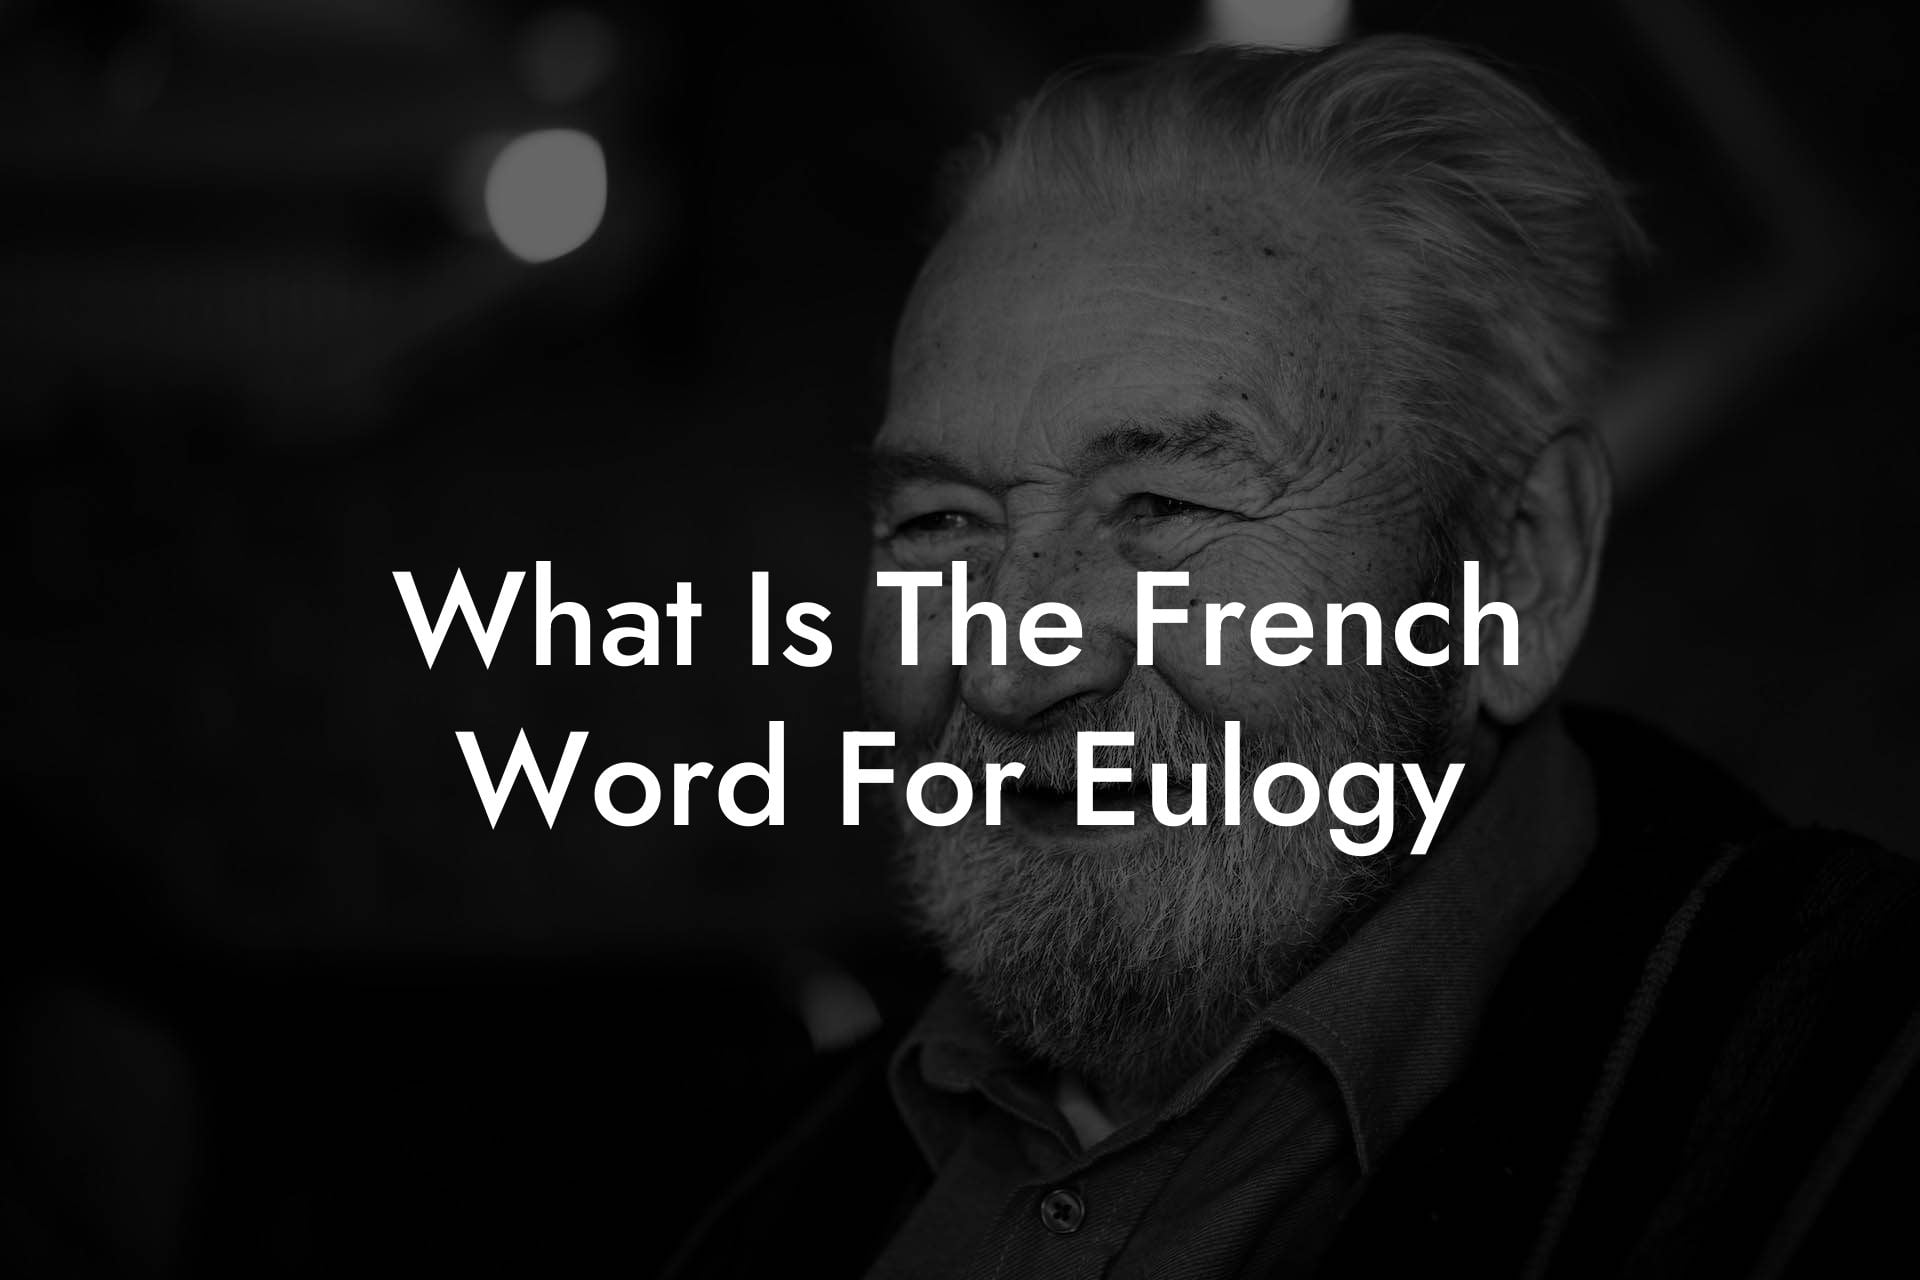 What Is The French Word For Eulogy